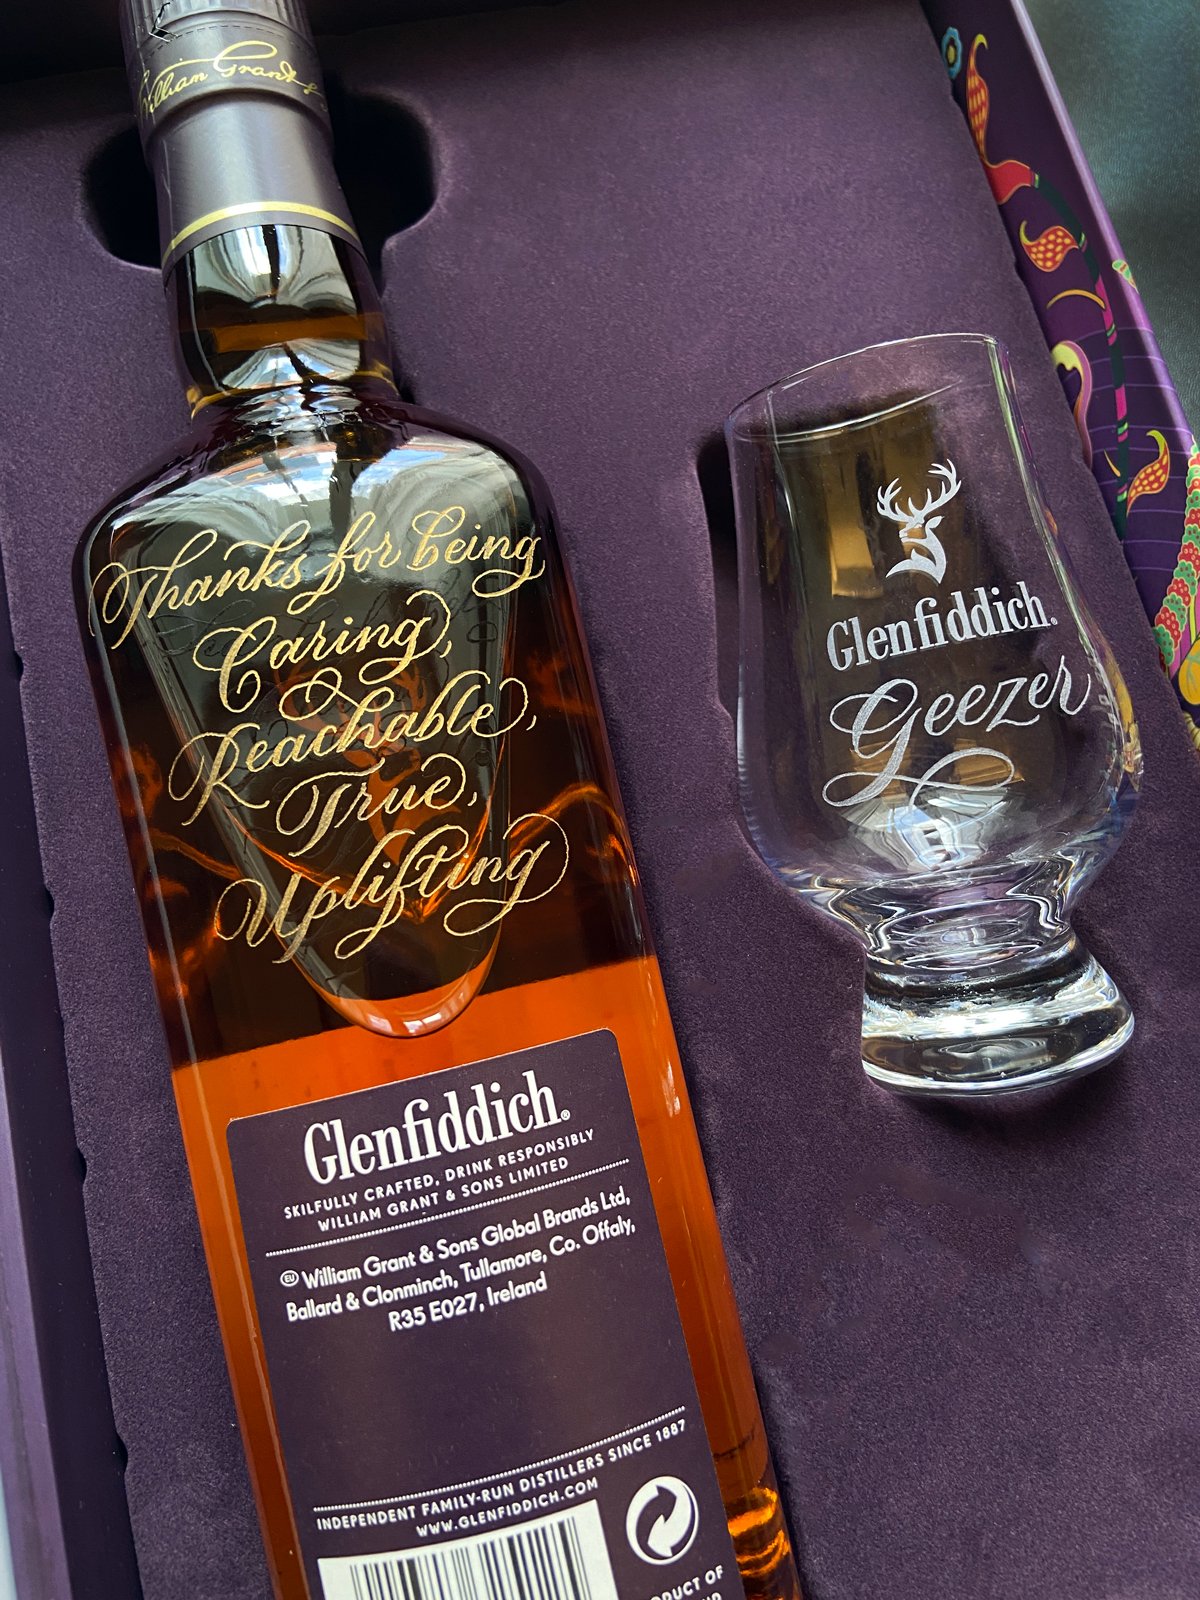 Calligraphy Engraving on Glenfiddich Single Malt Scotch Whisky 15 Years + Glass